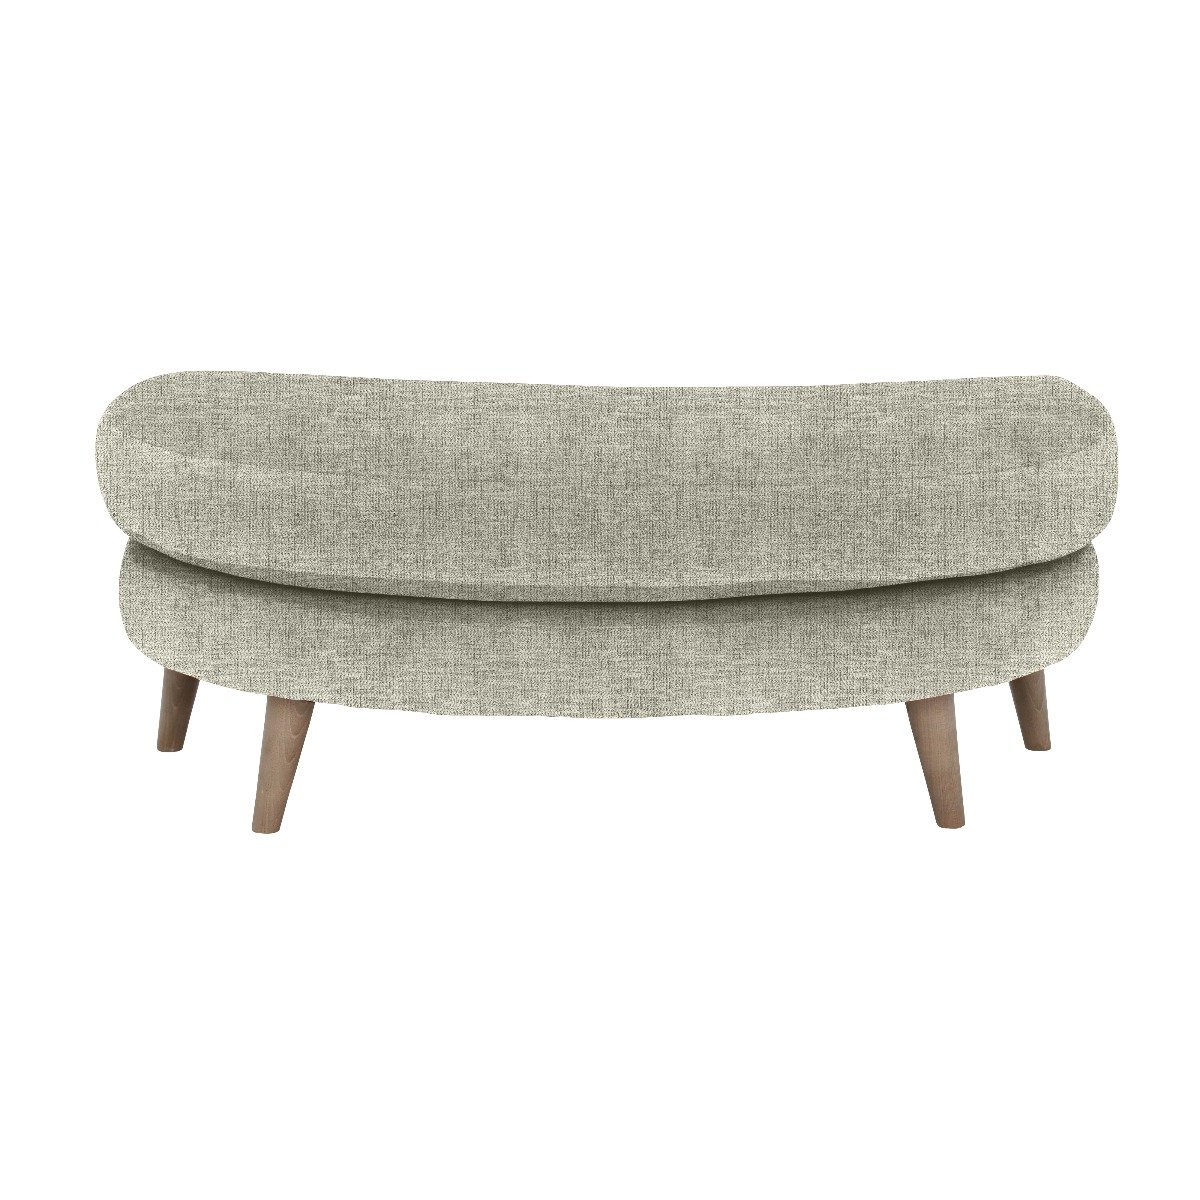 Myers Oval Cuddler Stool, Silver Fabric | Barker & Stonehouse